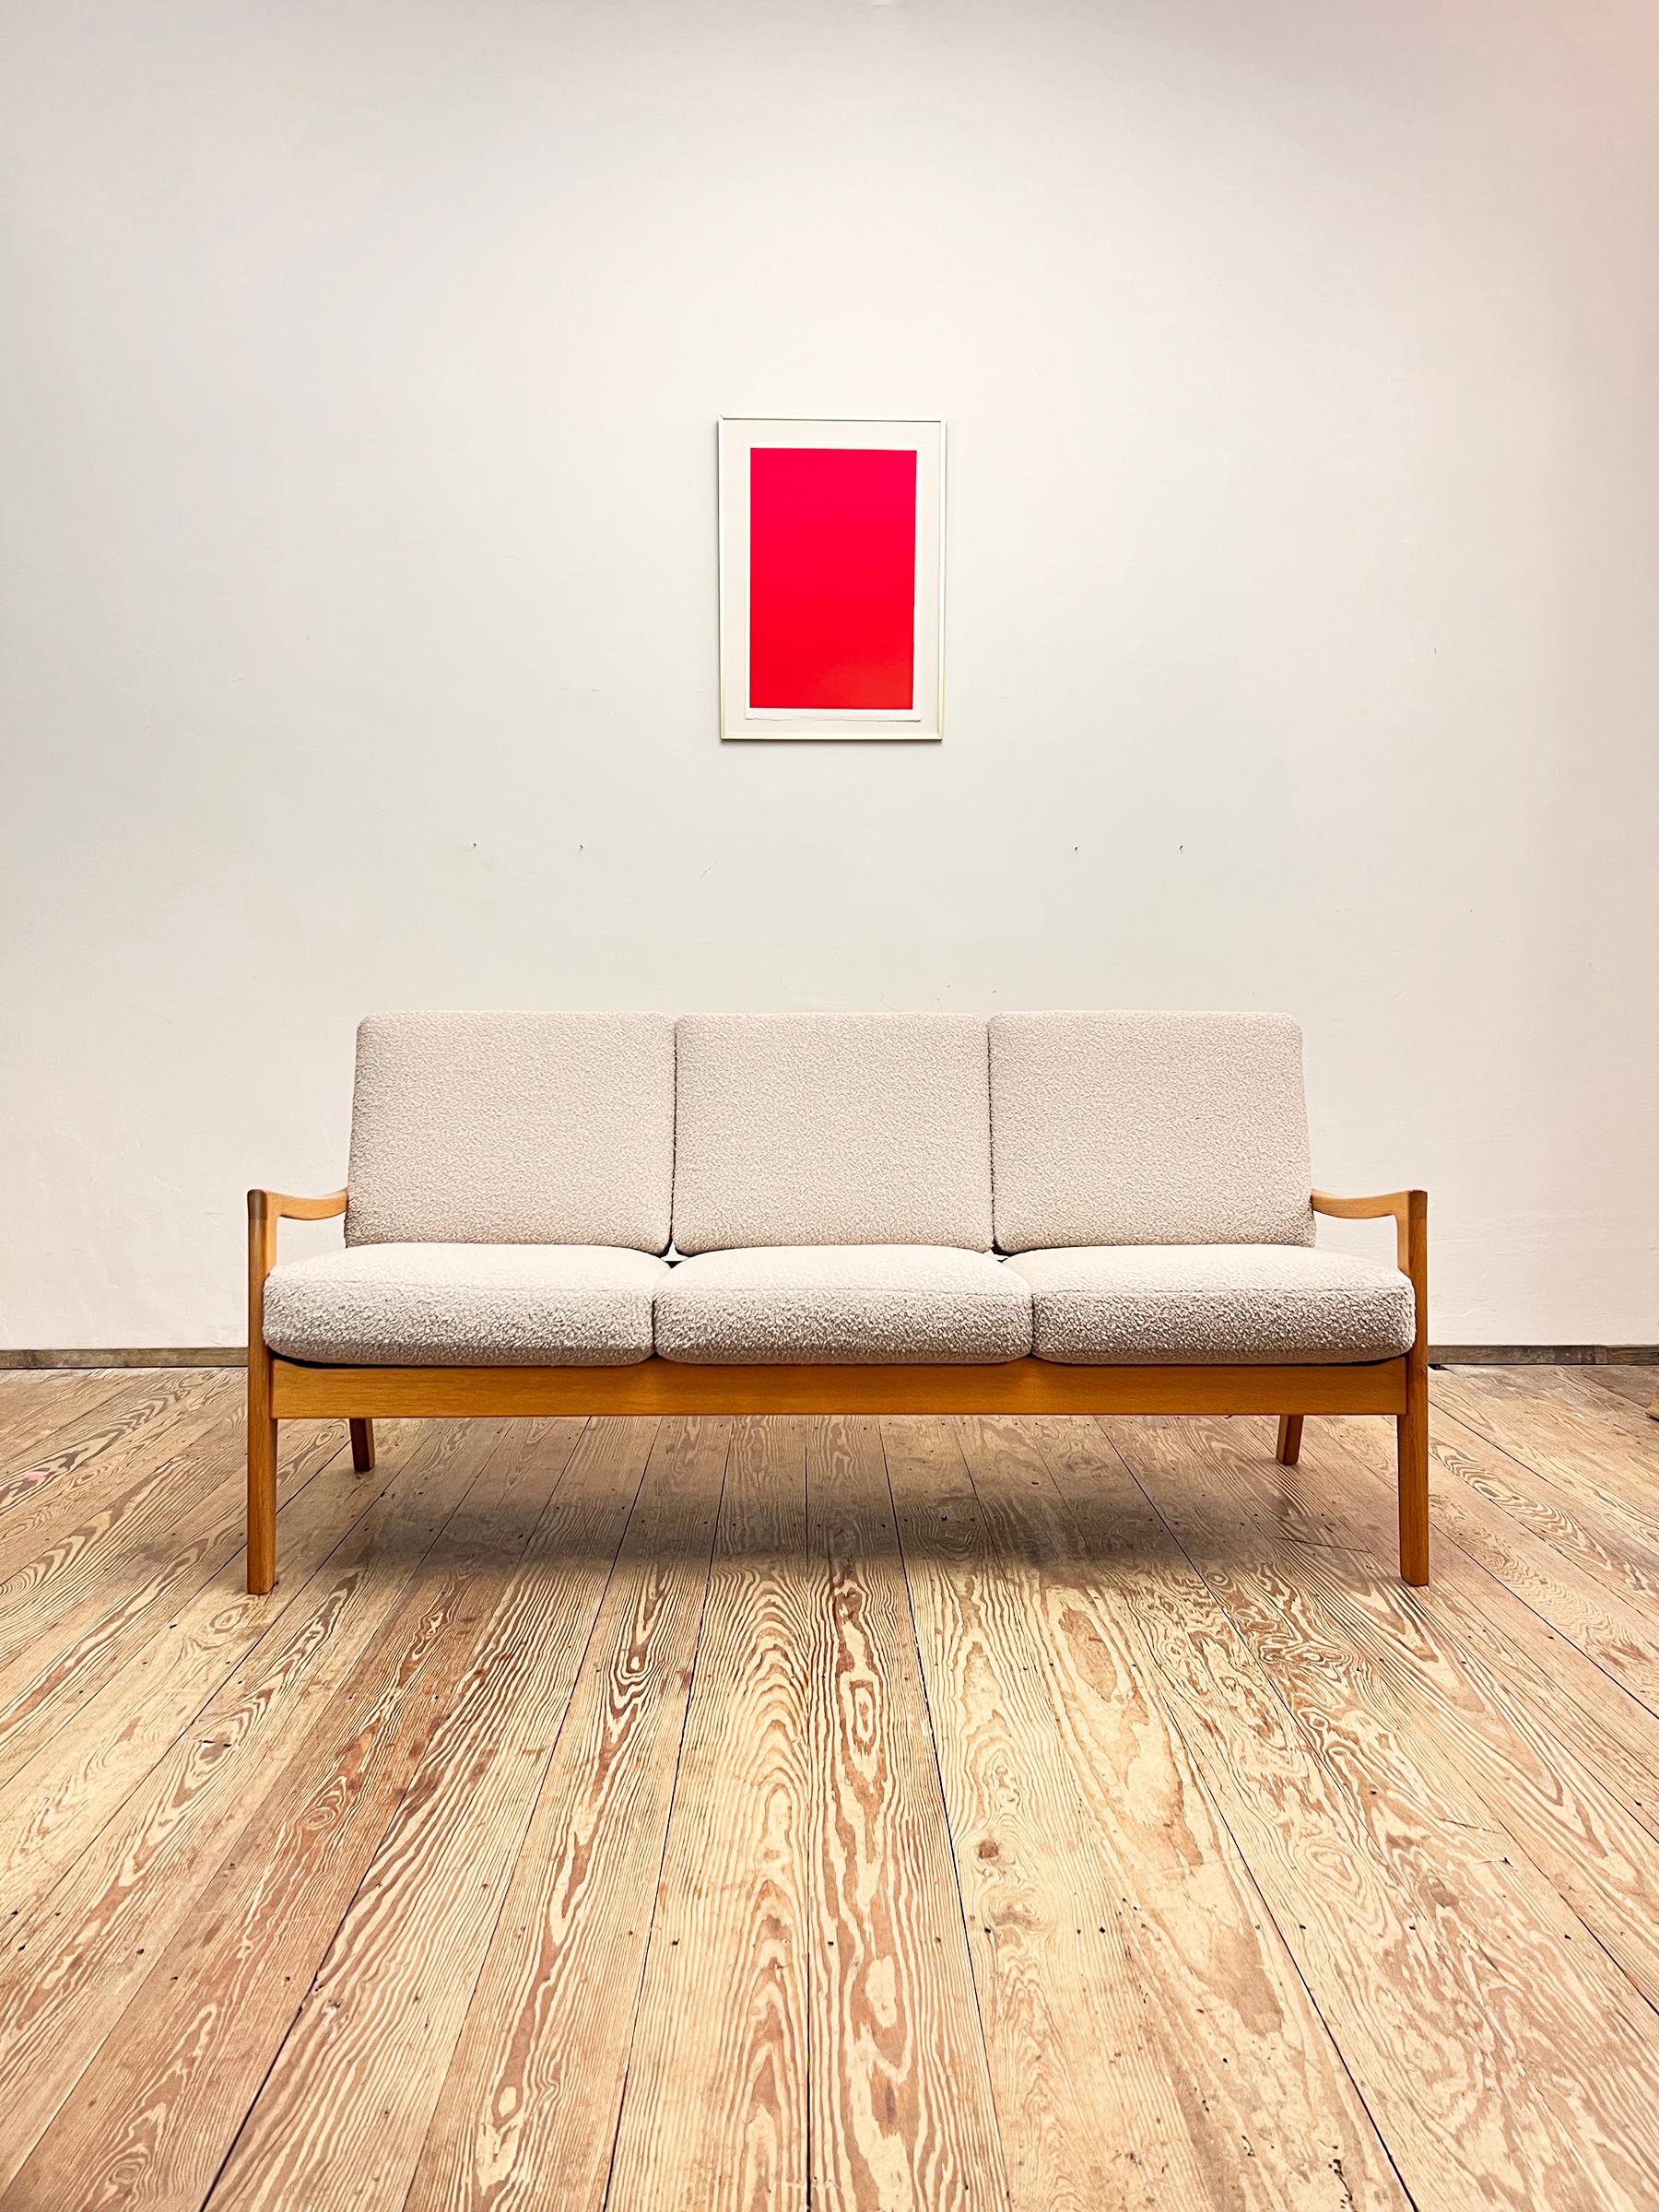 Dimensions: 182 x 75 x 80 cm (width x height x depth)

This mid-century three seat sofa was designed by Ole Wanscher for the Sentator Series for France and Son in the 1950s. This model is made out of solid oak wood and was manufactured by Poul